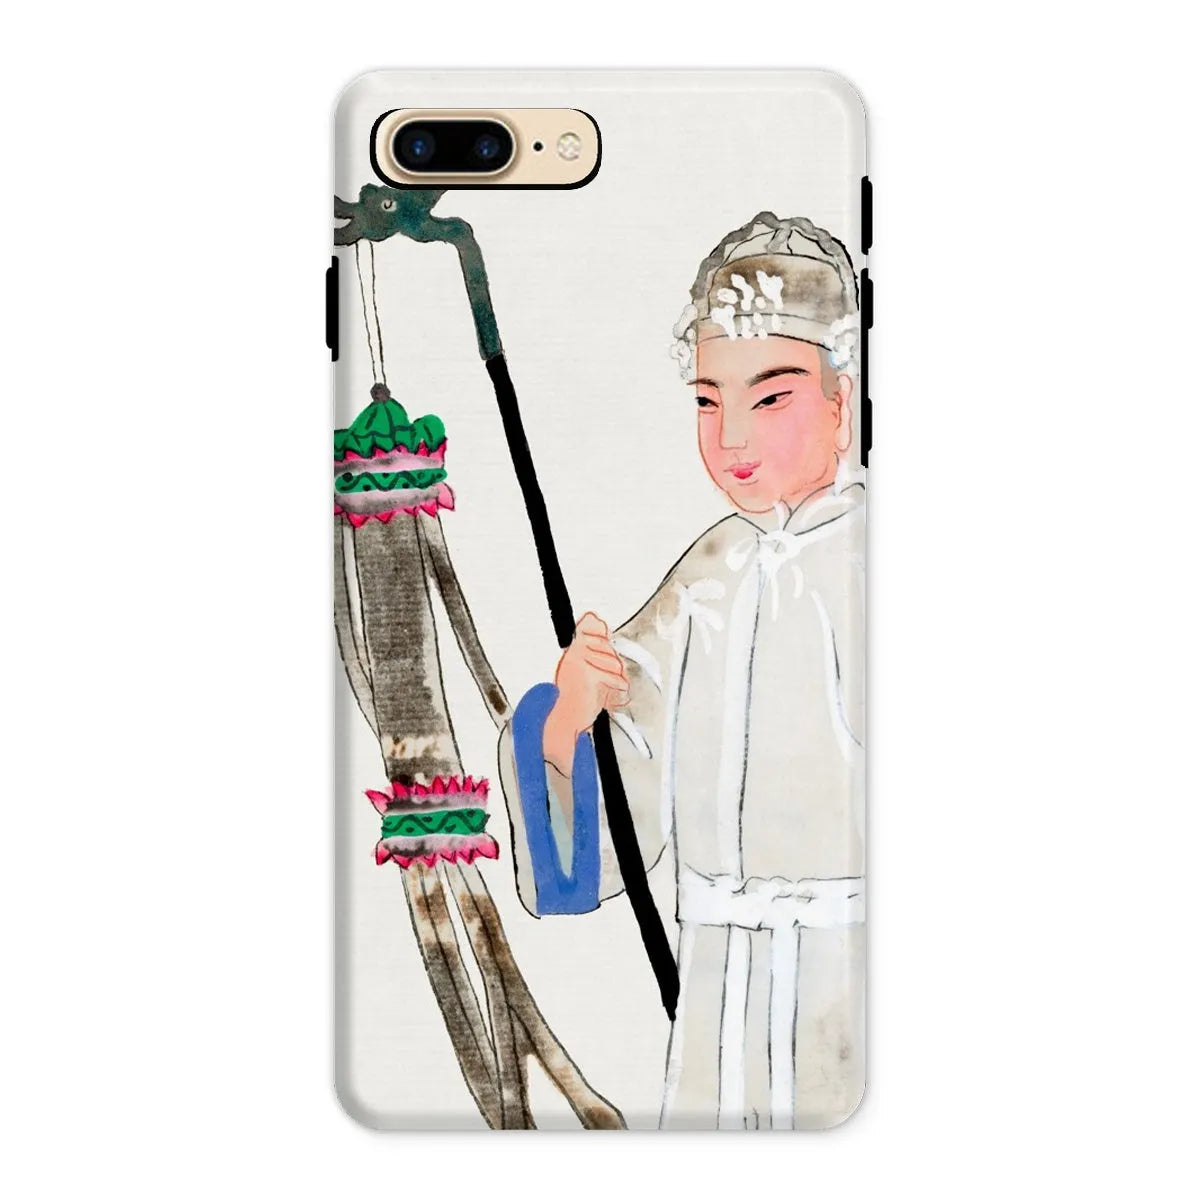 Man In Mourning - Chinese Historical Art Phone Case - Iphone 8 Plus / Matte - Mobile Phone Cases - Aesthetic Art